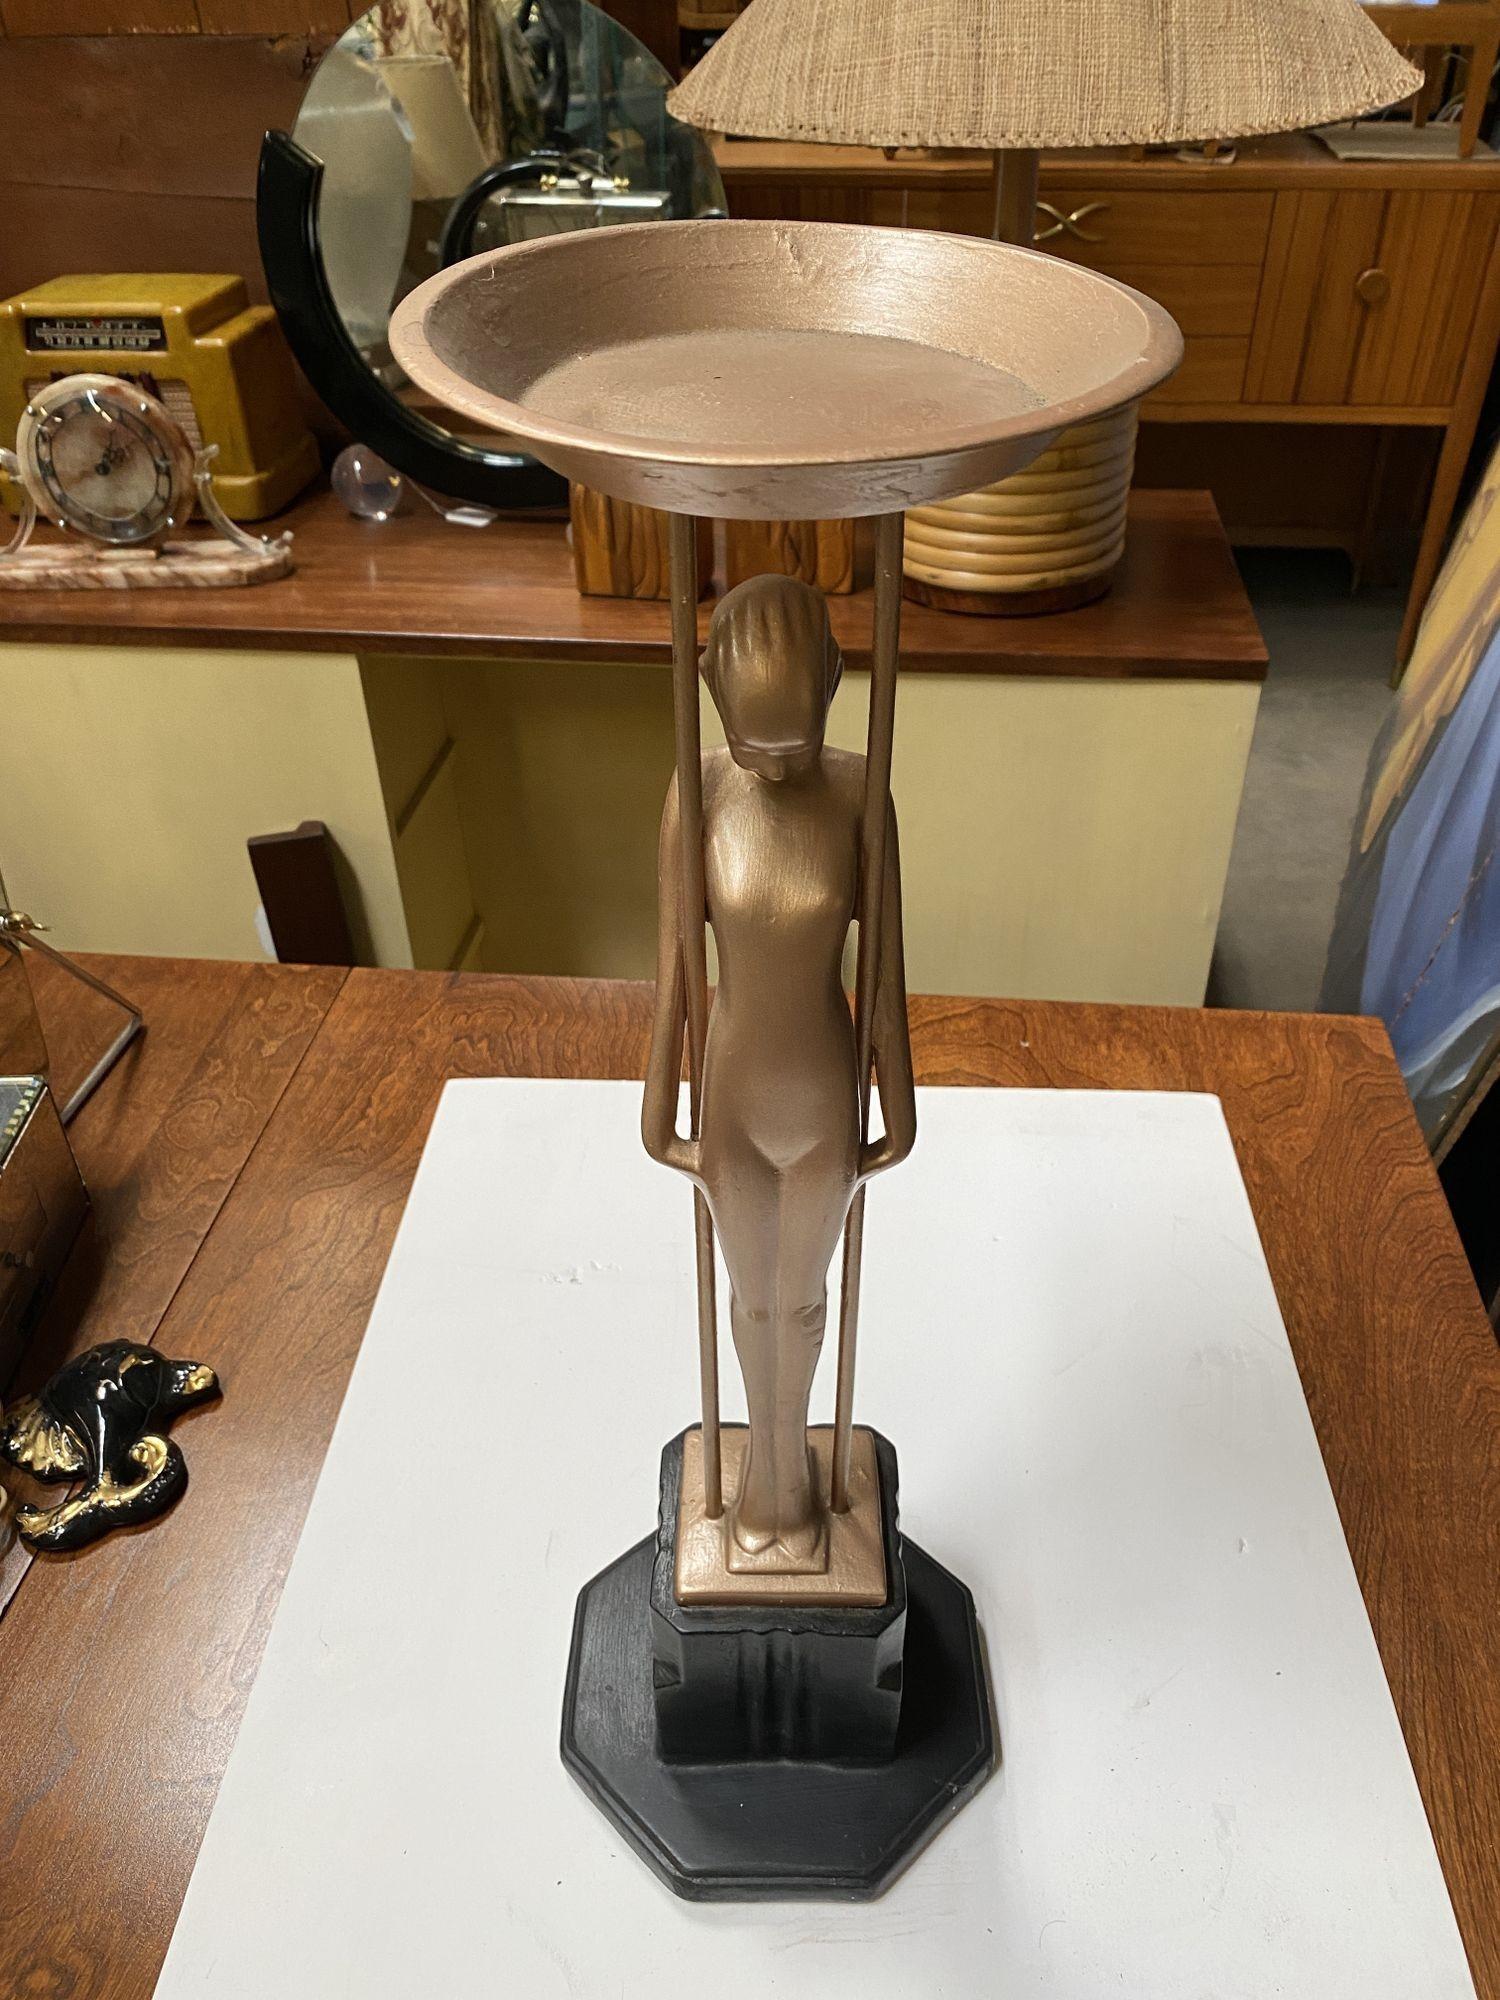 Frankart company figural “Sarcophagus Girl“ metal ashtray stand featuring a nude women holding up the ashtray stand standing on a stepped art deco base. 

Frankart # T349, patent # 85411 by Max Abel 1931.
 
Dimensions: 27.5